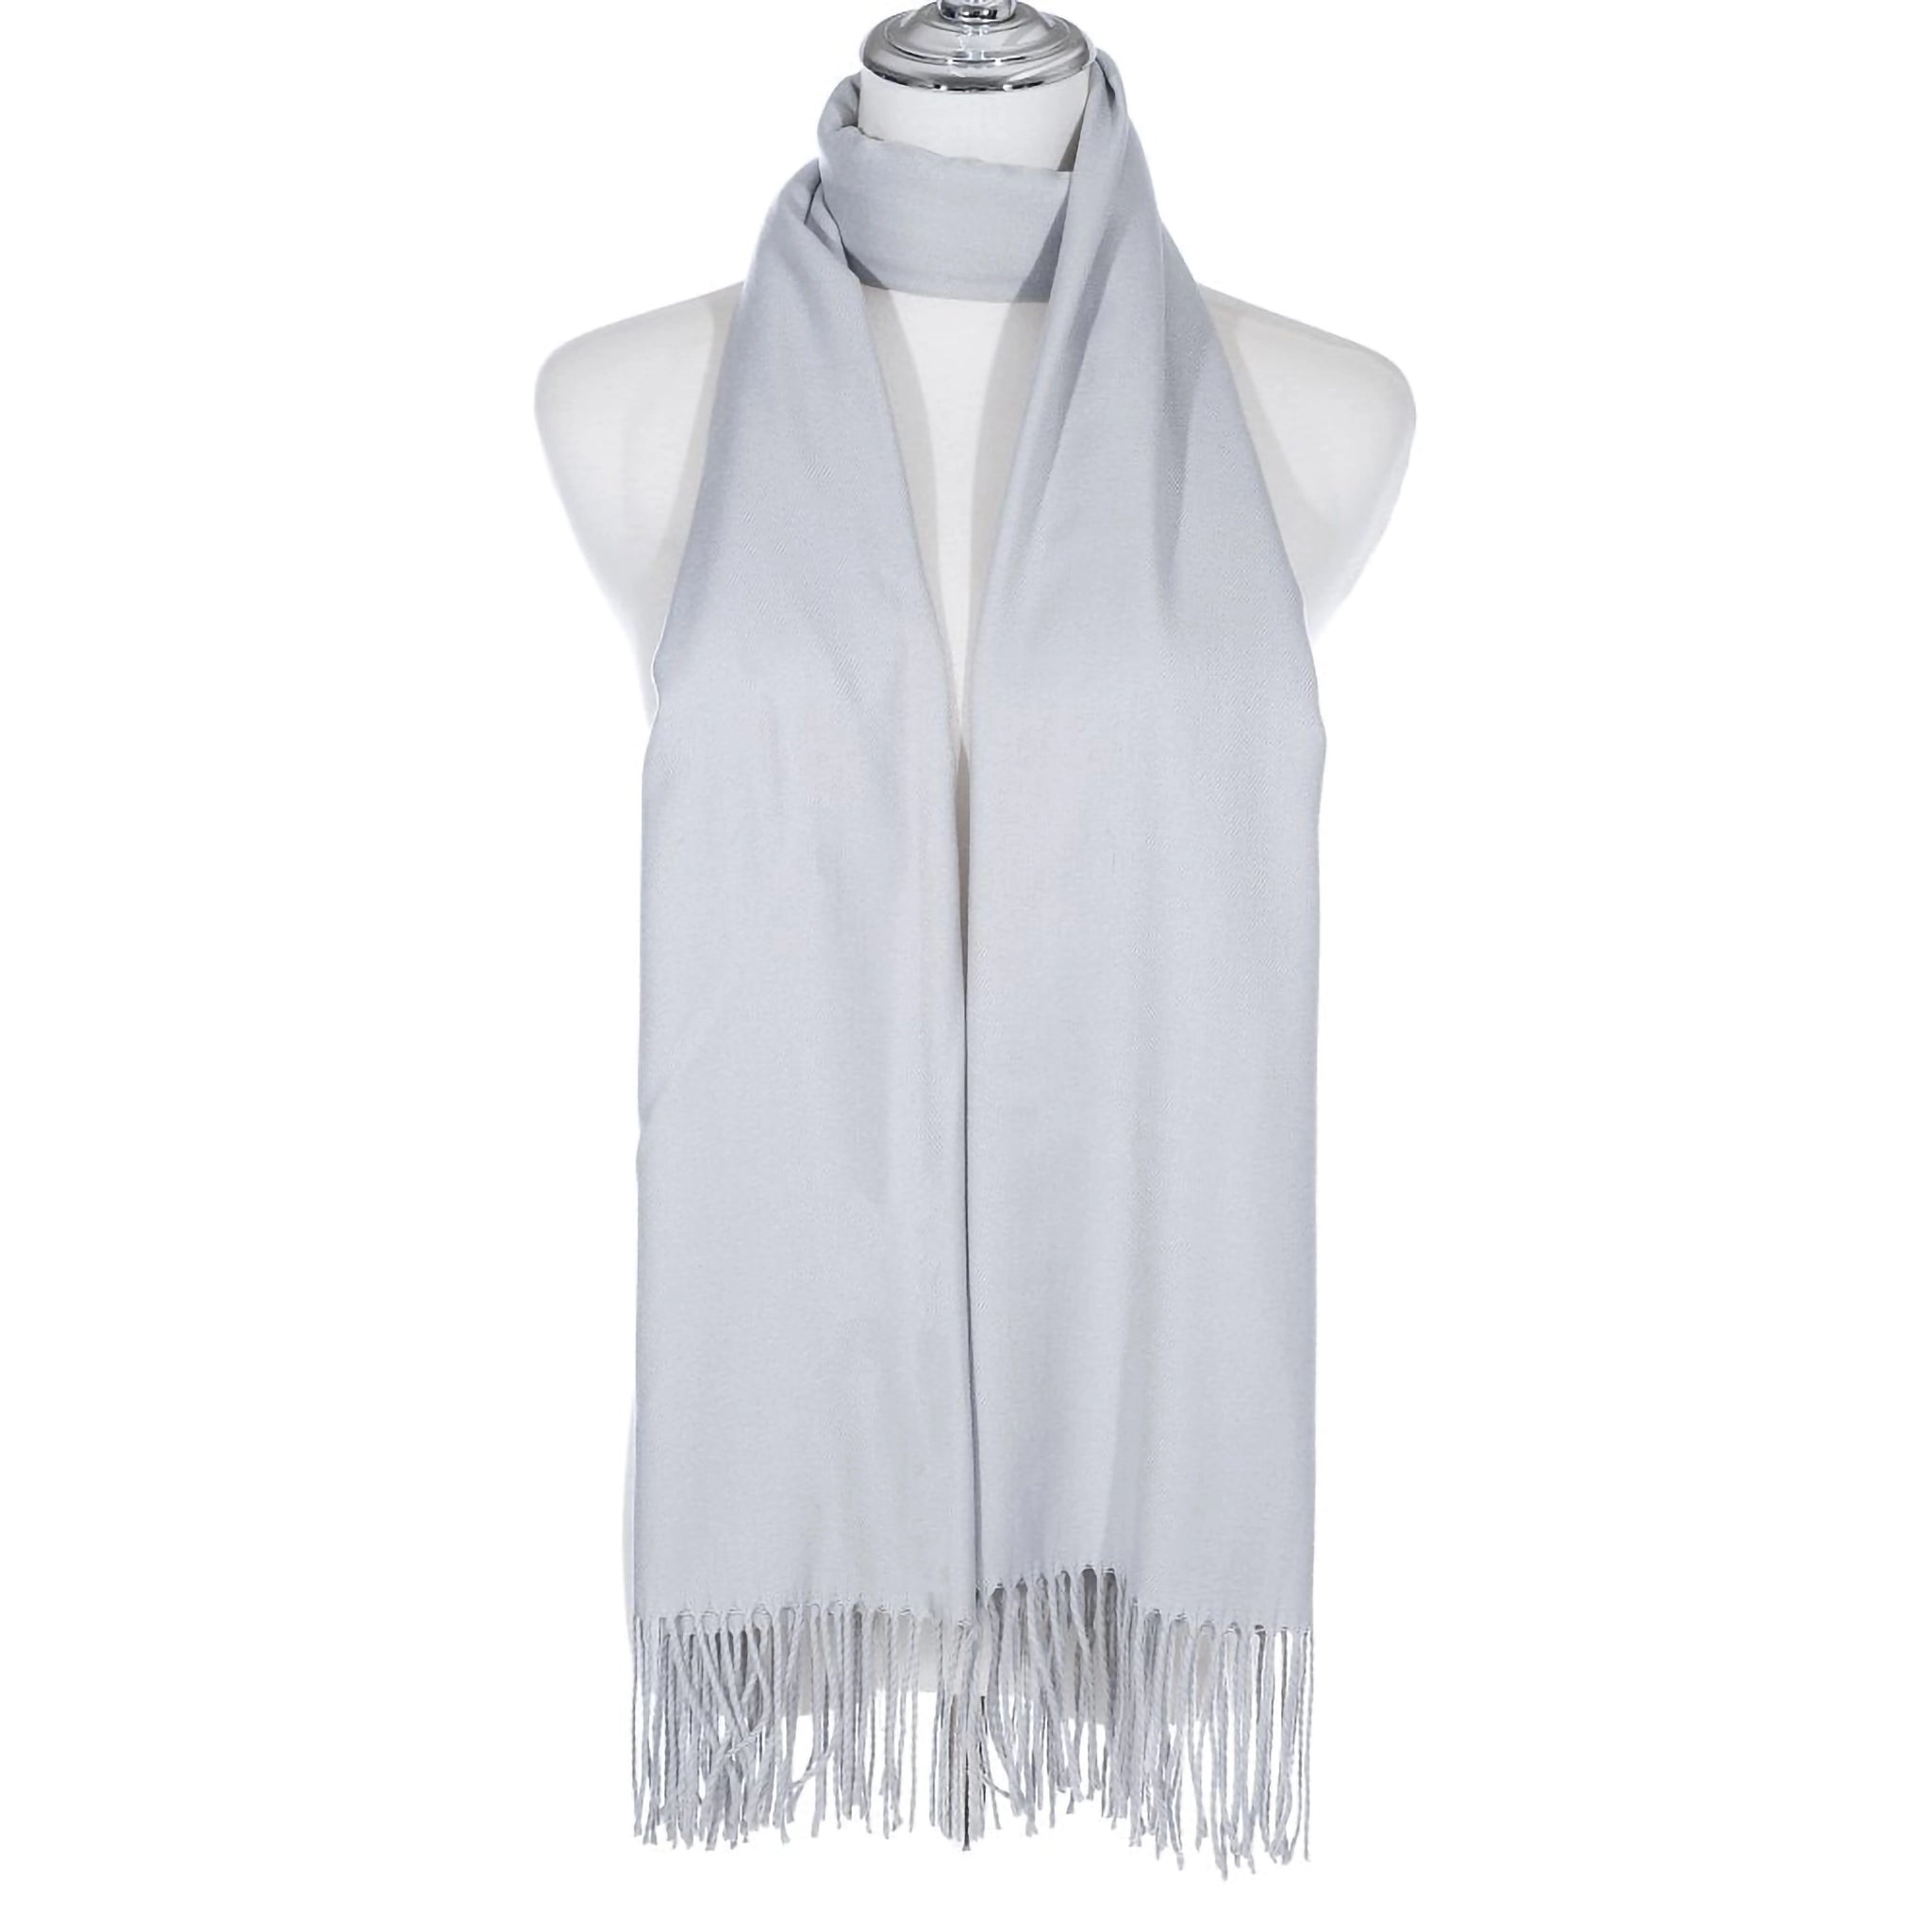 A long scarf in a dove grey with tassels